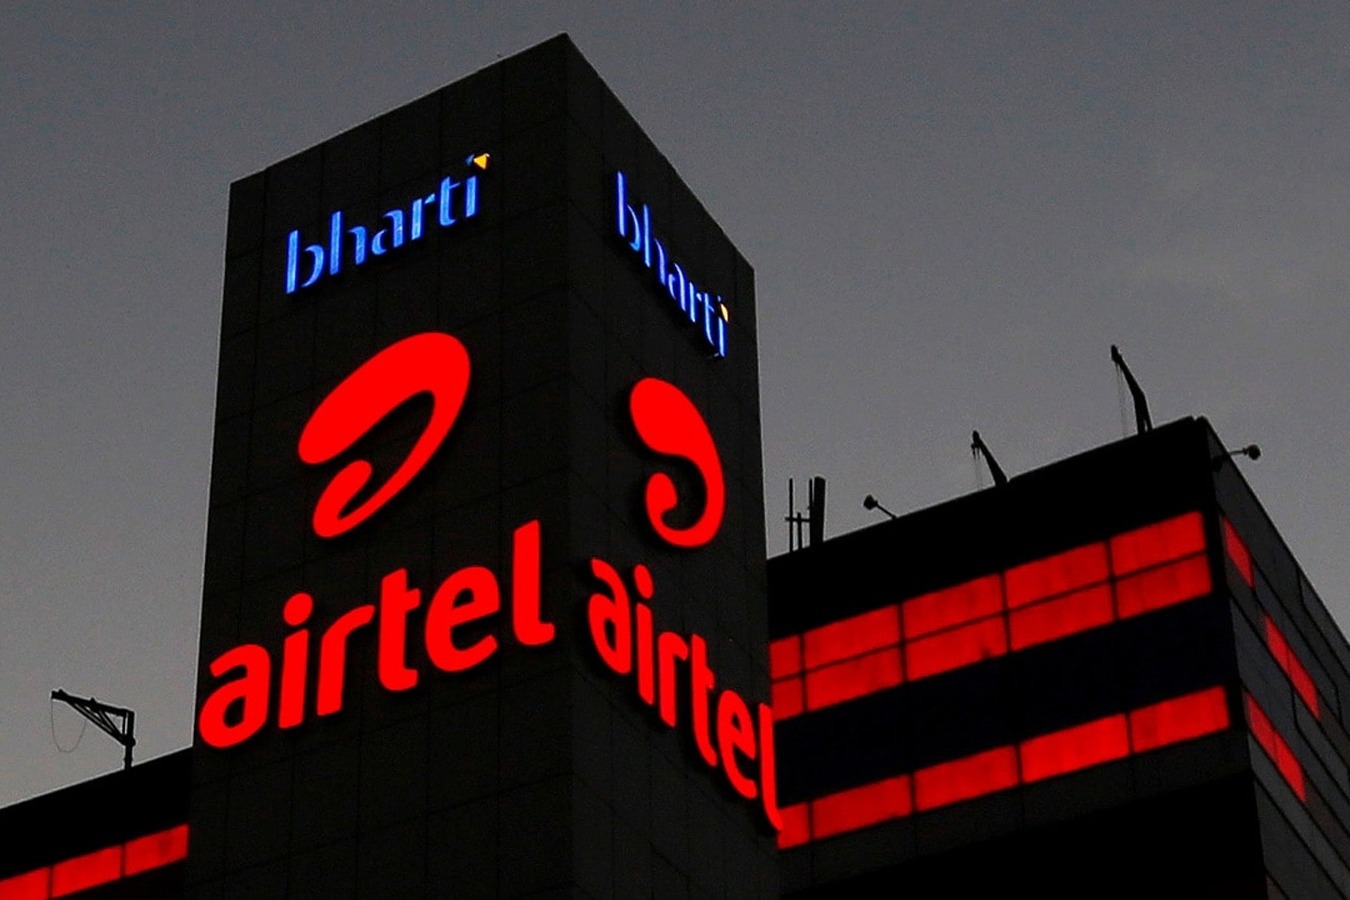 Airtel 5G Demonstration Goes Live in Hyderabad Ahead of Commercial Rollout